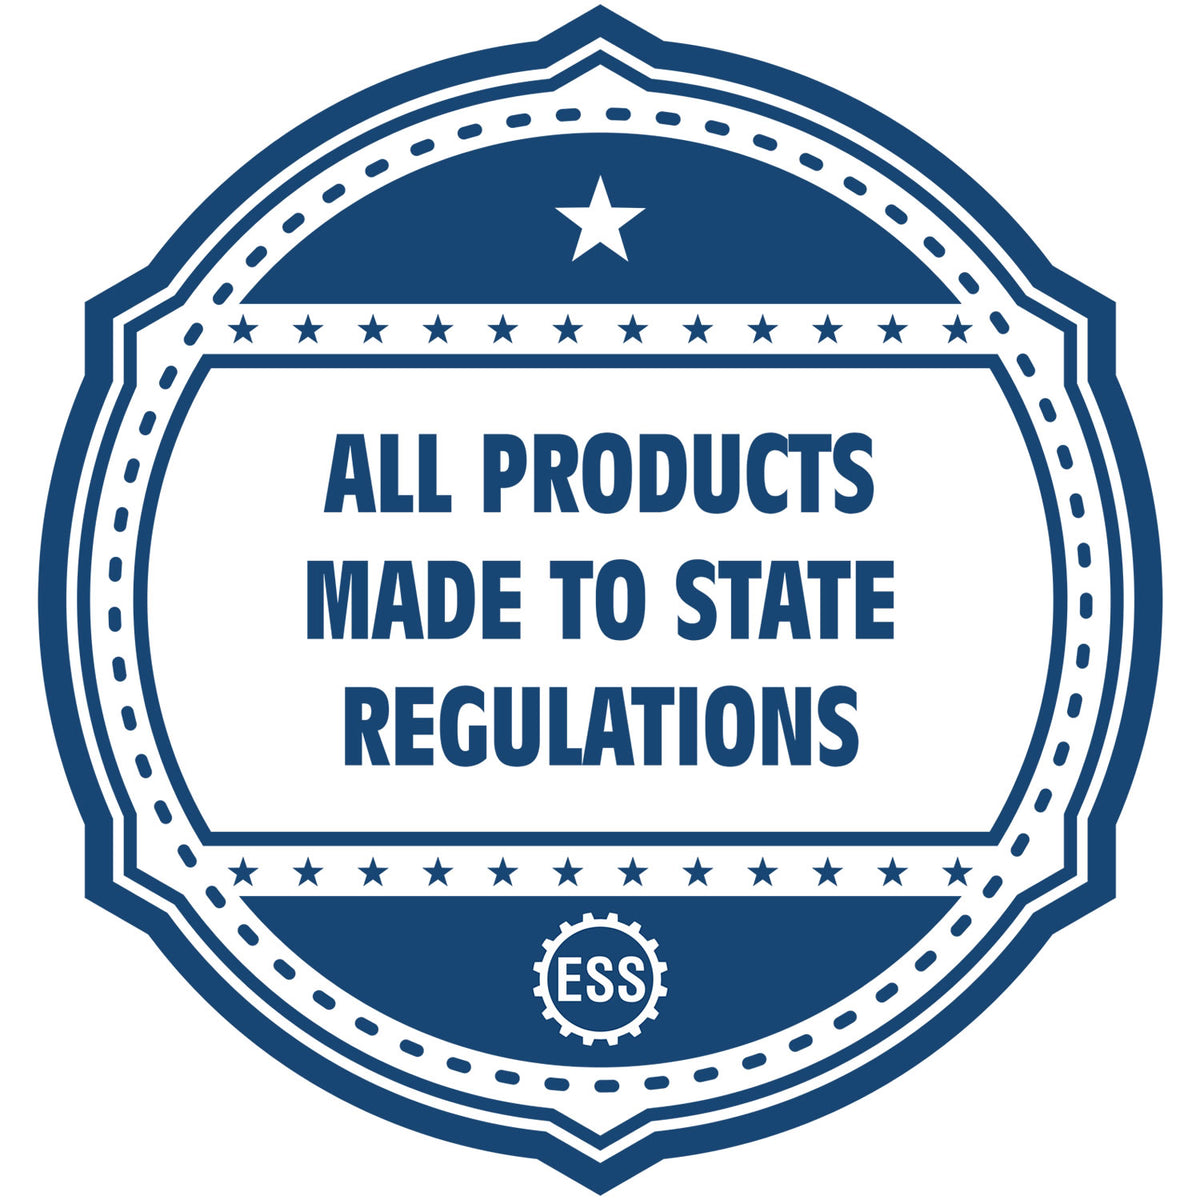 An icon or badge element for the State of Mississippi Long Reach Architectural Embossing Seal showing that this product is made in compliance with state regulations.